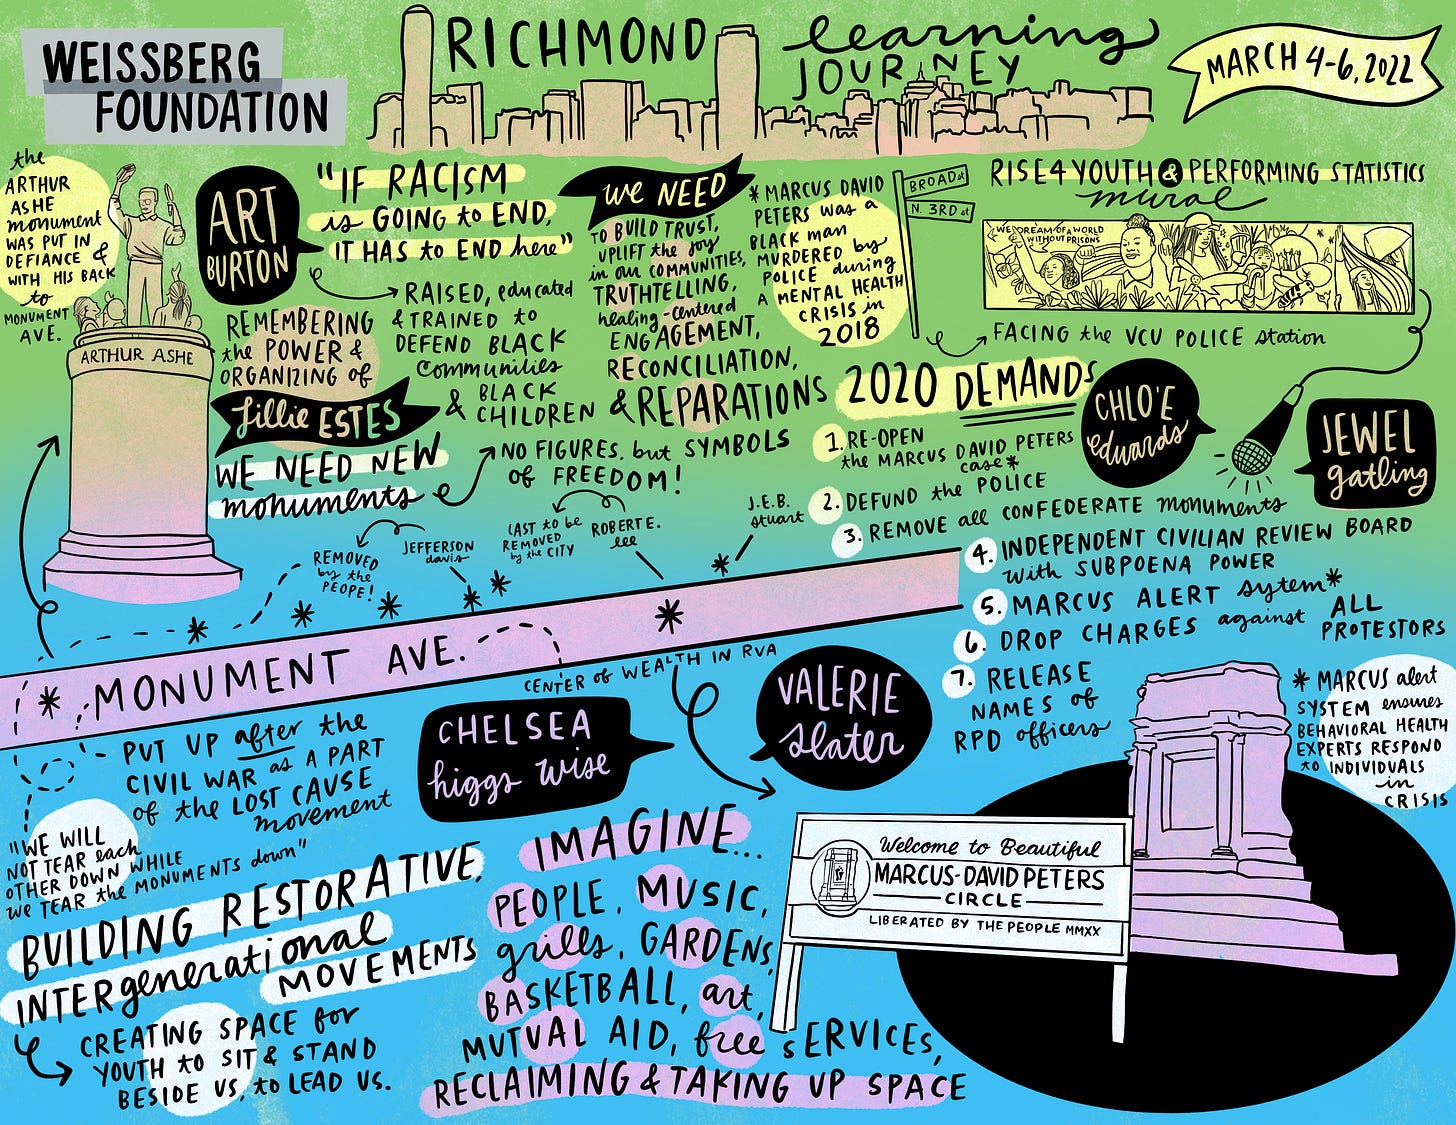 Graphic Recording of the Richmond Learning Journey featuring the history of Monument Avenue alongside the history of Black organizing in Richmond with a focus on the 2020 uprisings